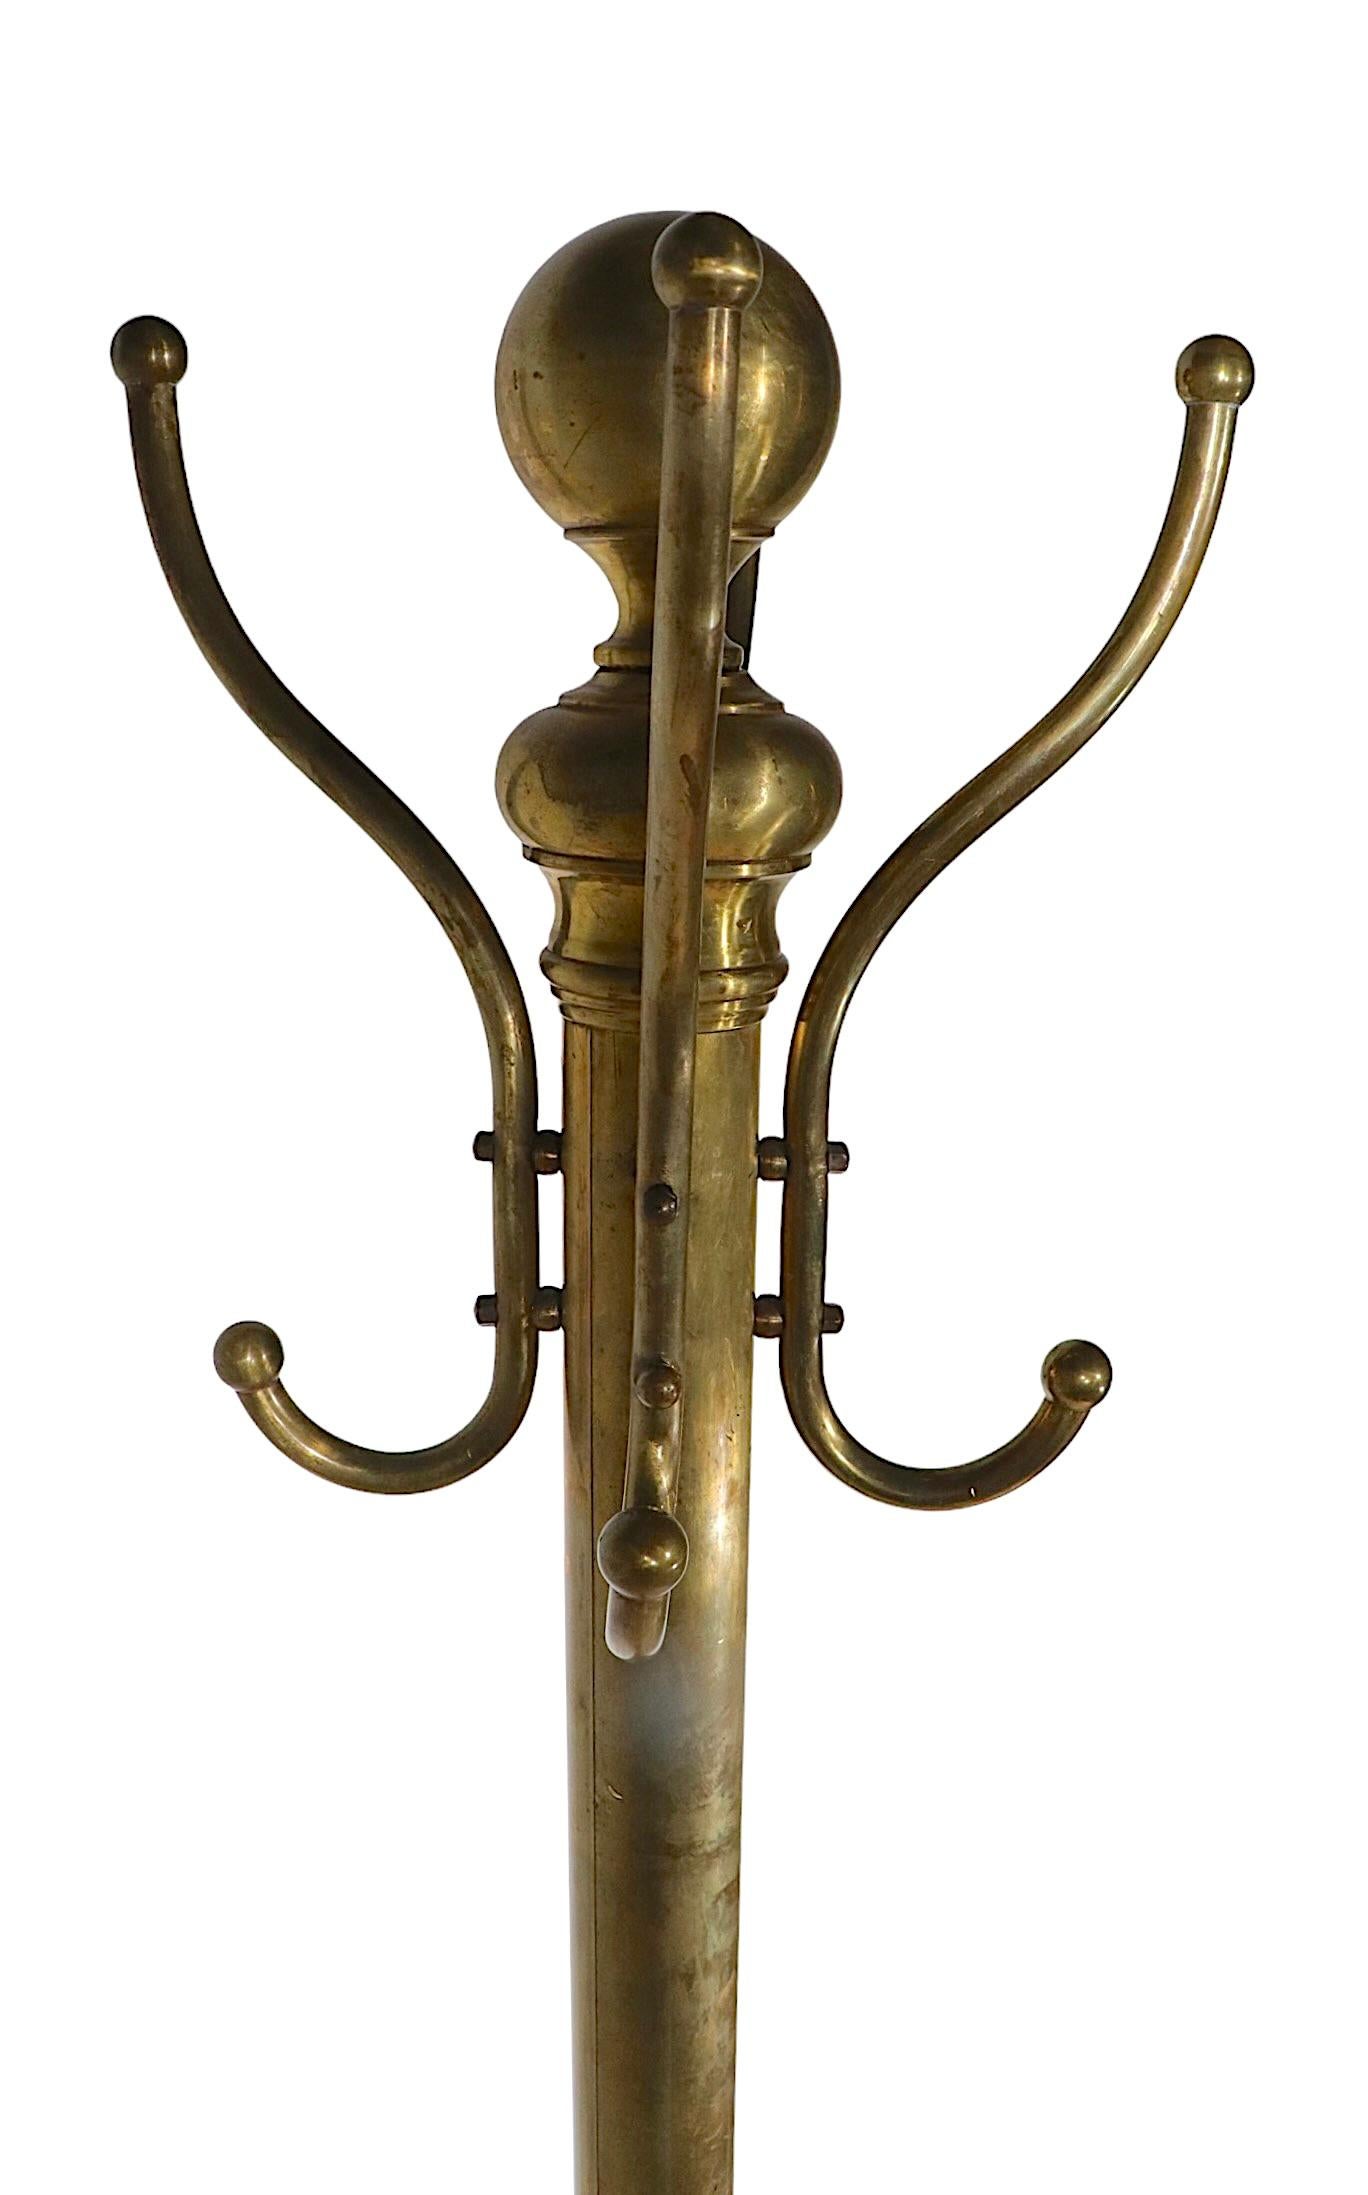 Freestanding architectural coat tree, rack, stand in brass, circa 1900/1940. This classic coat tree is in very fine, original condition, free of damage, repairs or missing parts. It is sturdy and stable, great at a doorway entrance to hang coats